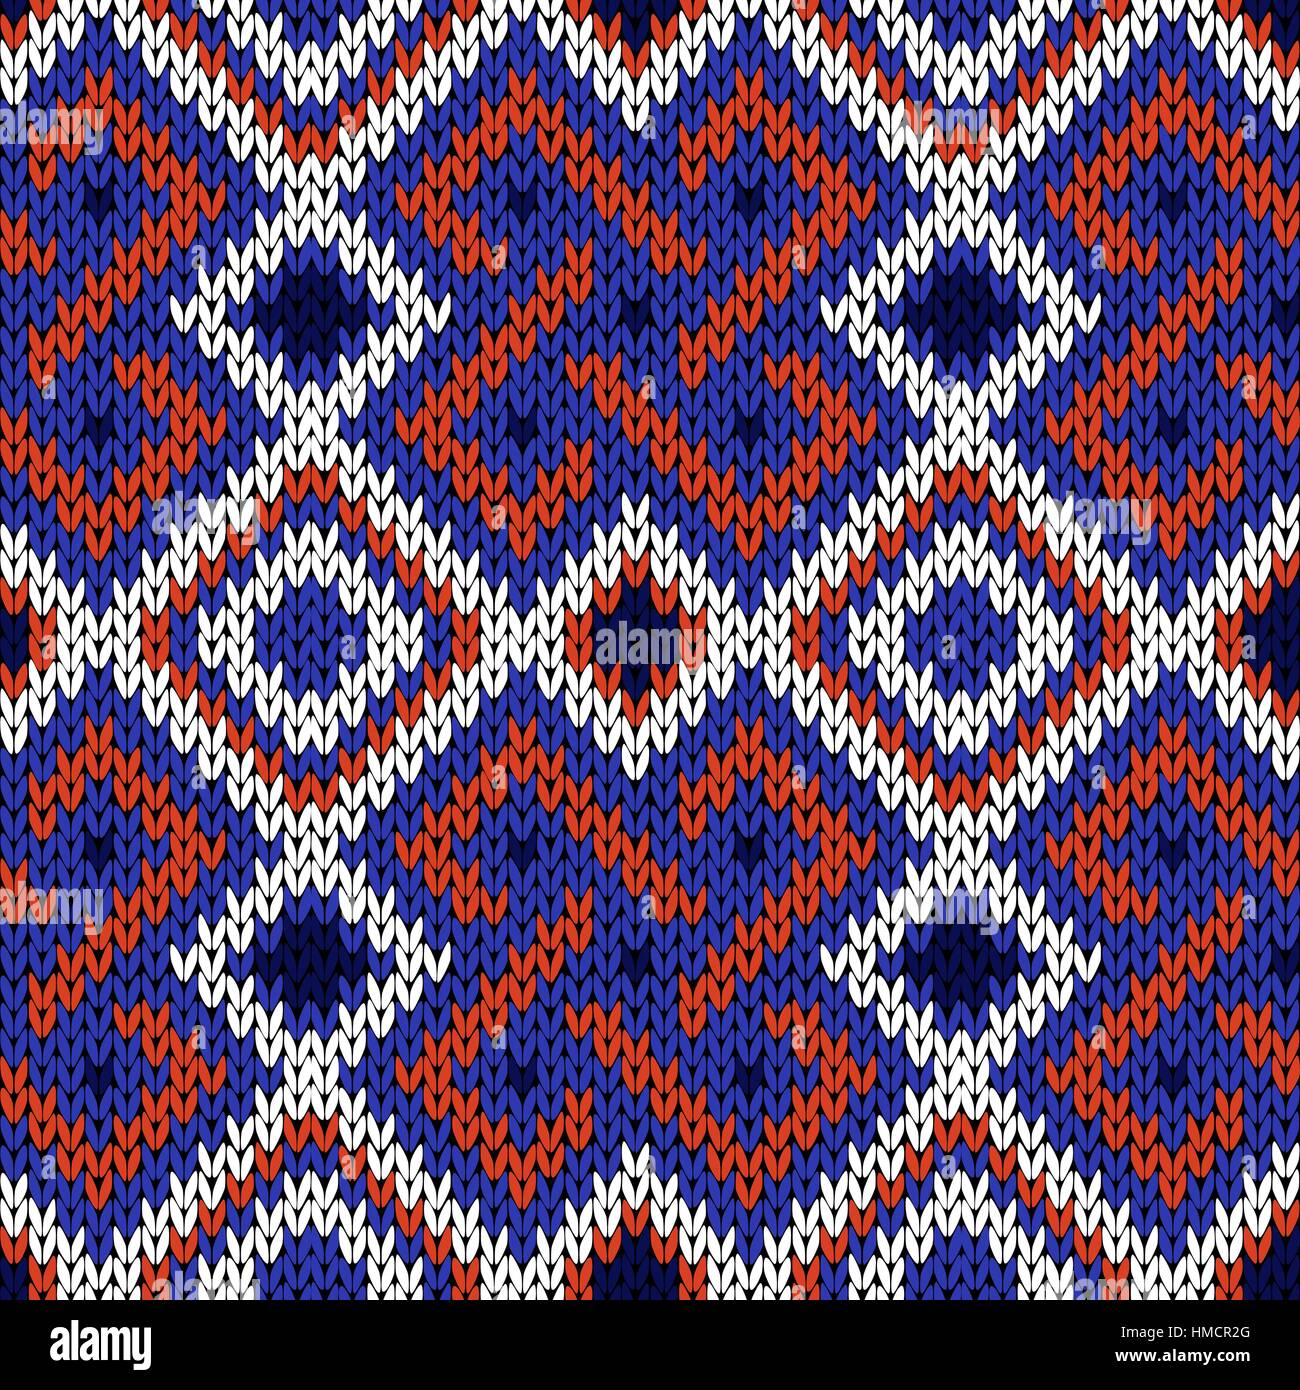 Seamless knitted ornate ethnic vector pattern as a fabric texture in blue, white and orange colors Stock Vector